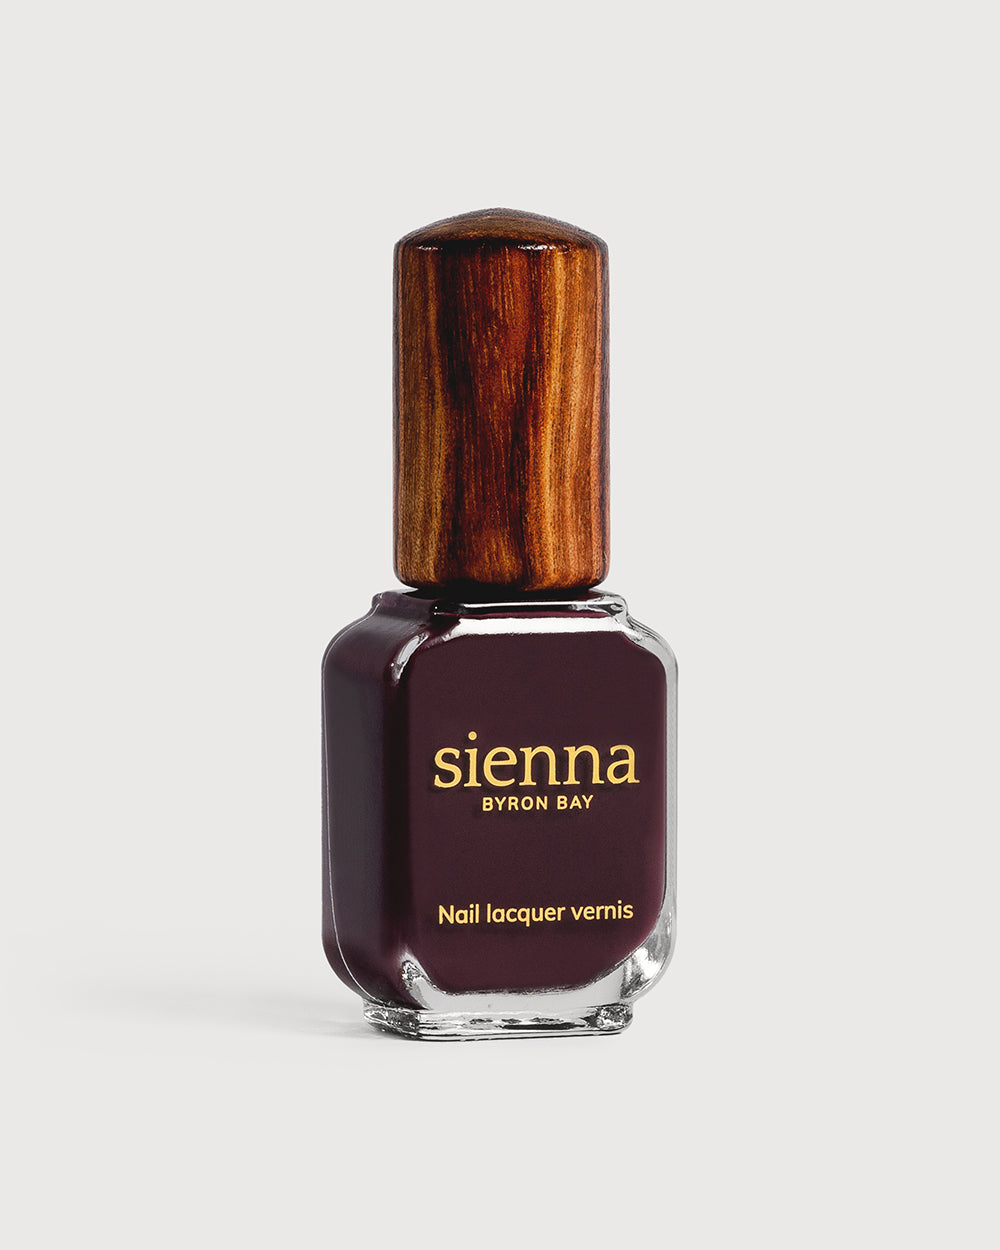 Aubergine nail polish glass bottle with timber cap